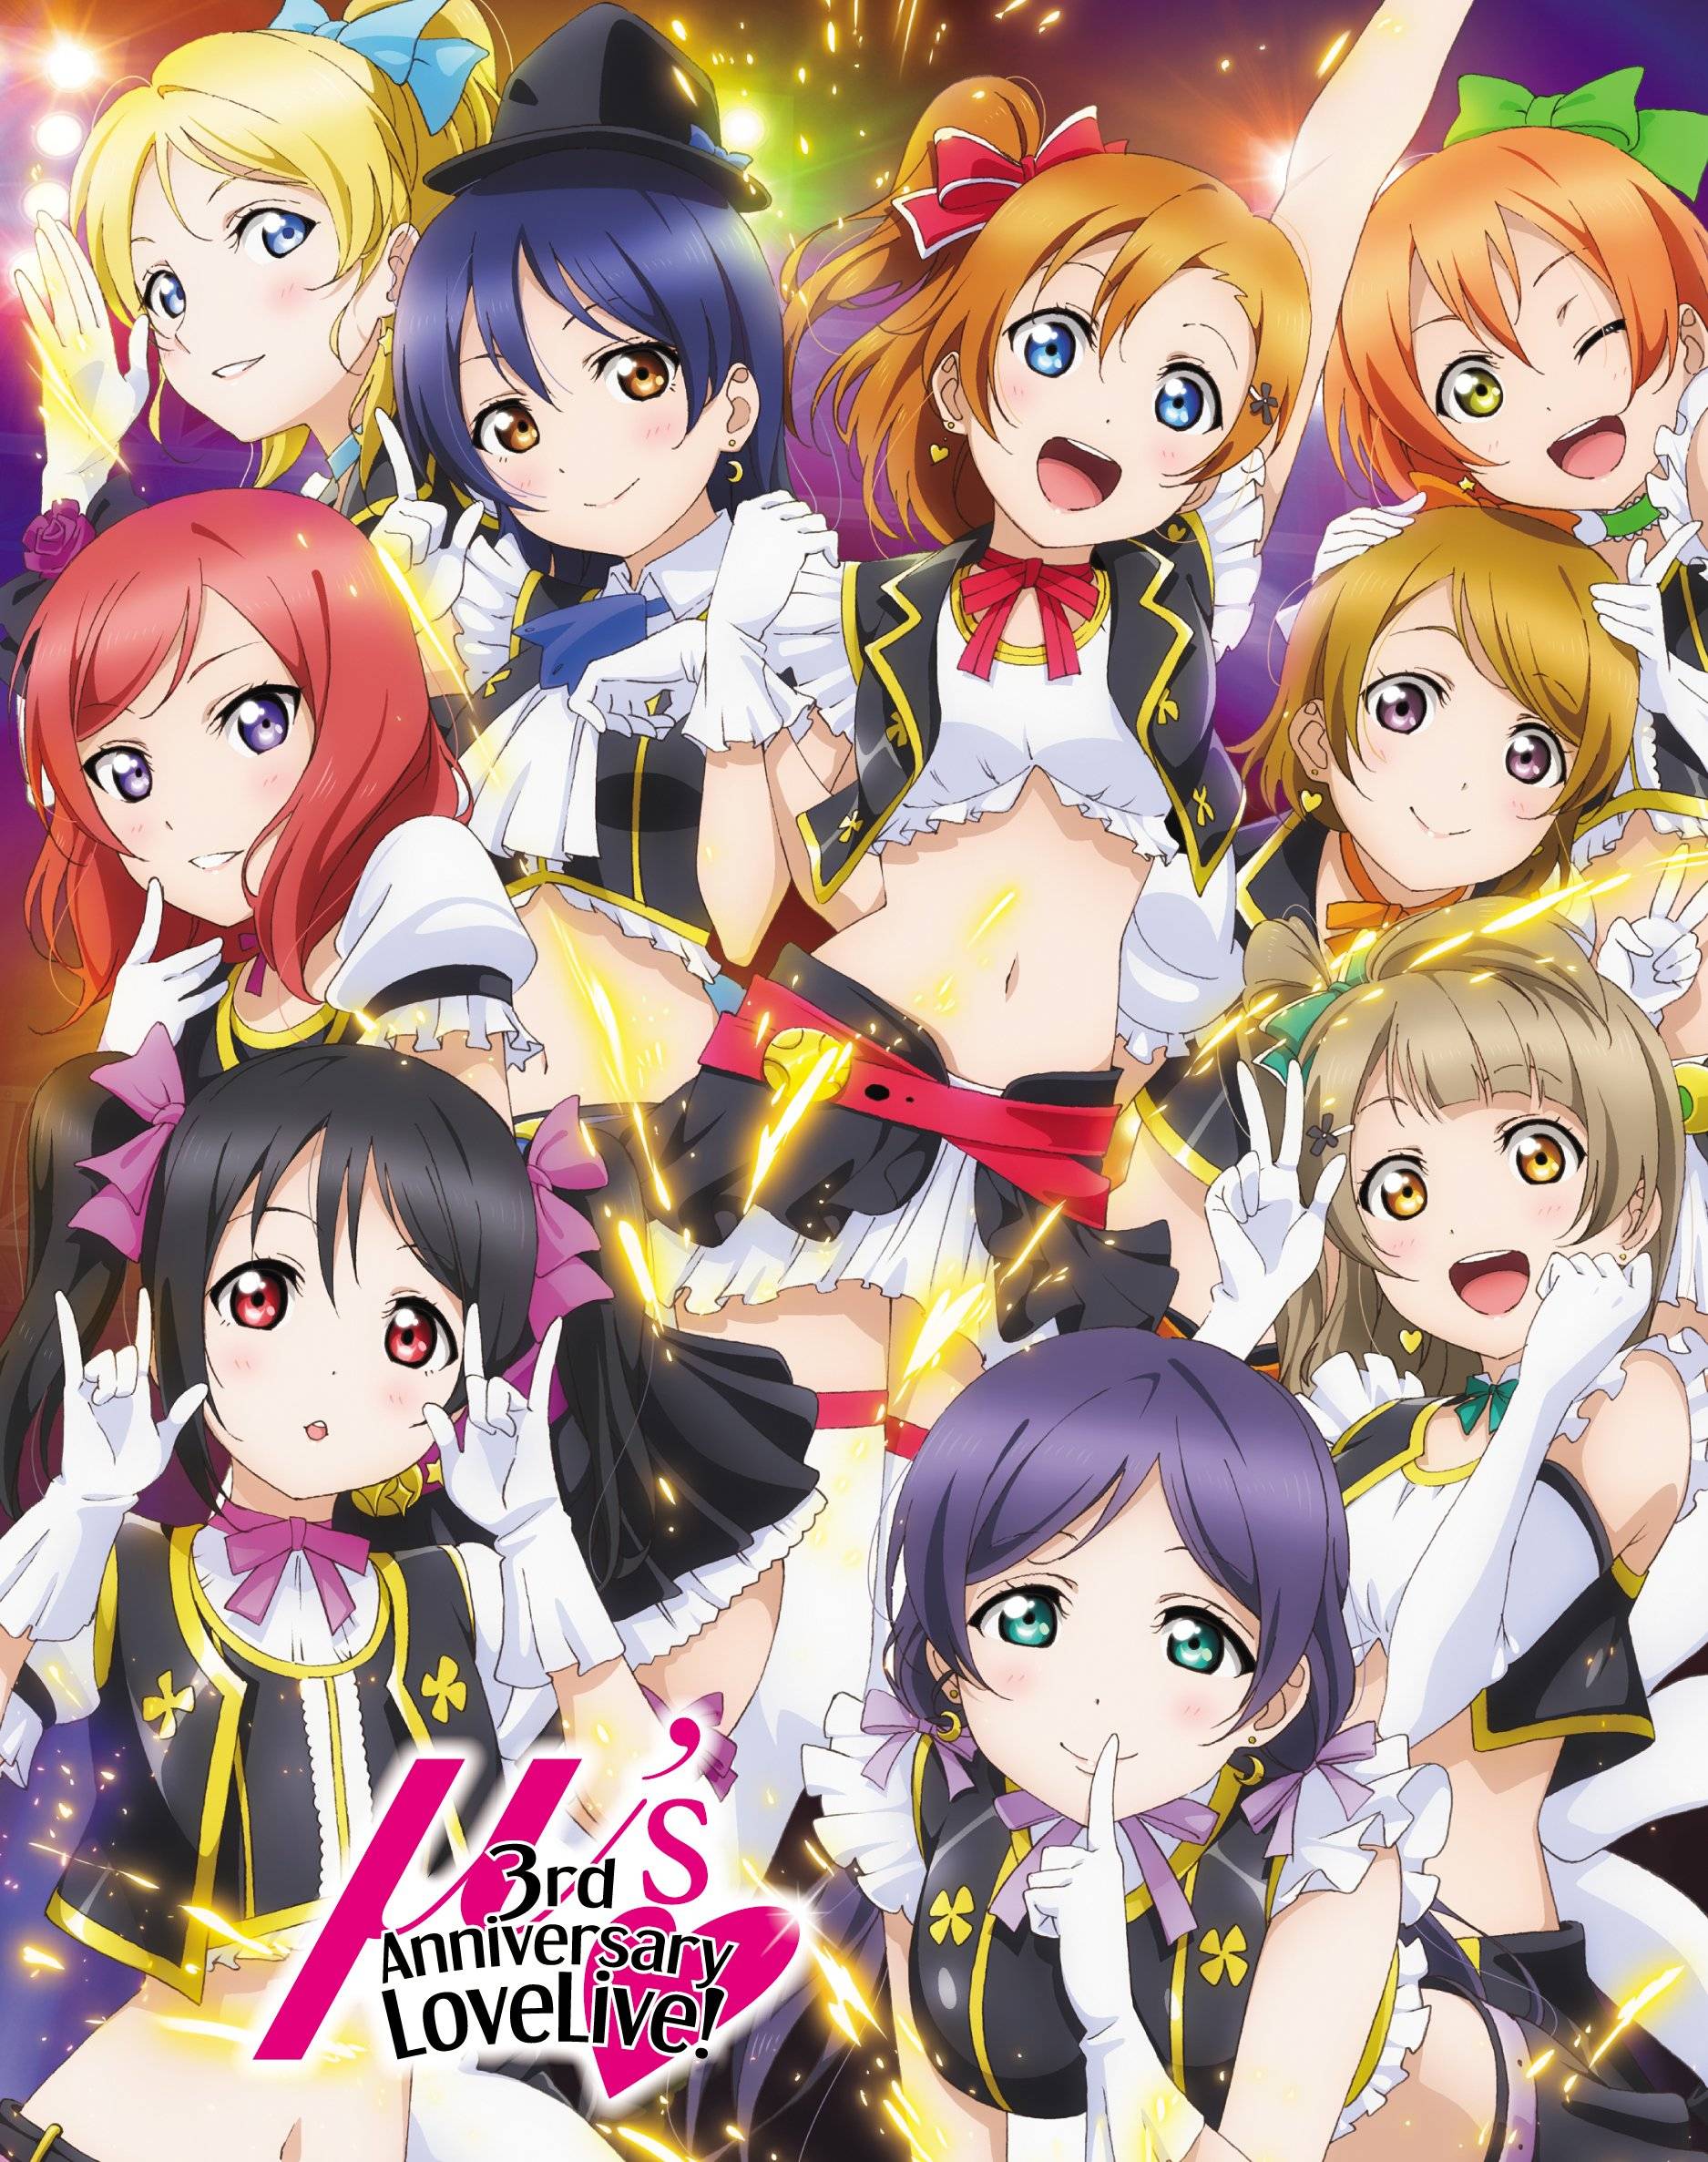 10 Big Differences Between The Love Live! Manga And Anime